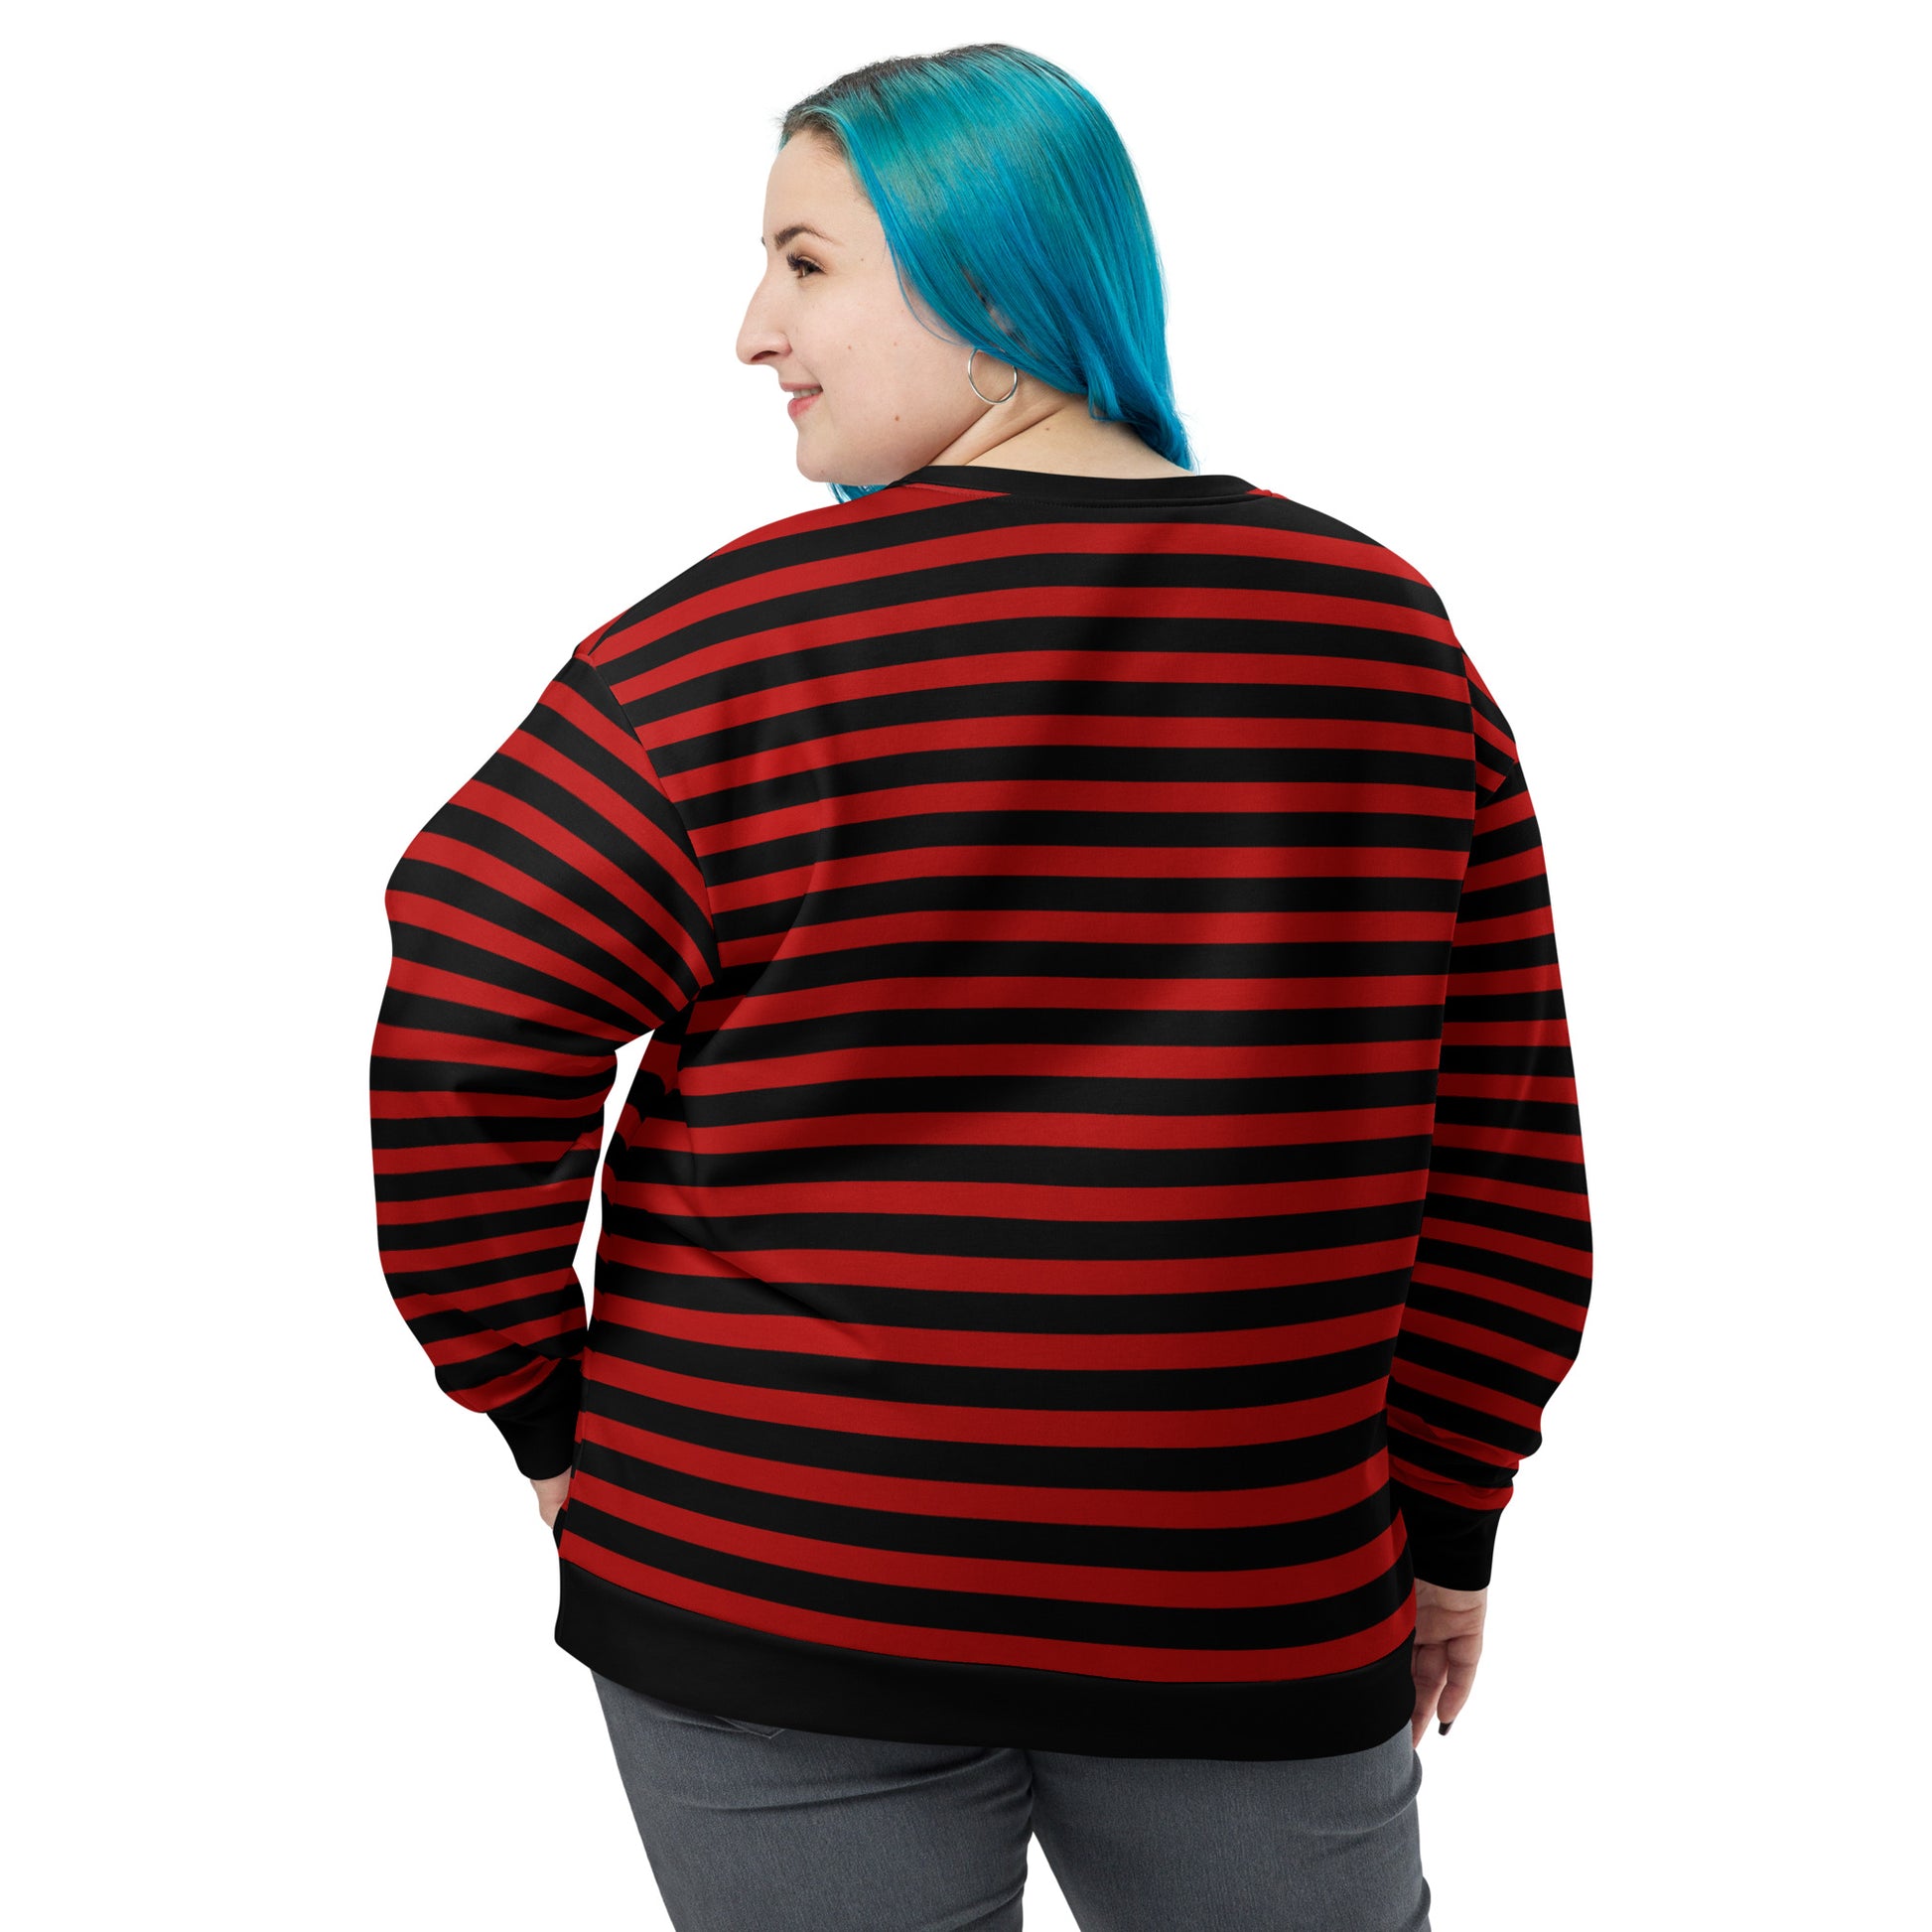 Timeless Red & Black Eco Sweater: Unisex Statement Piece